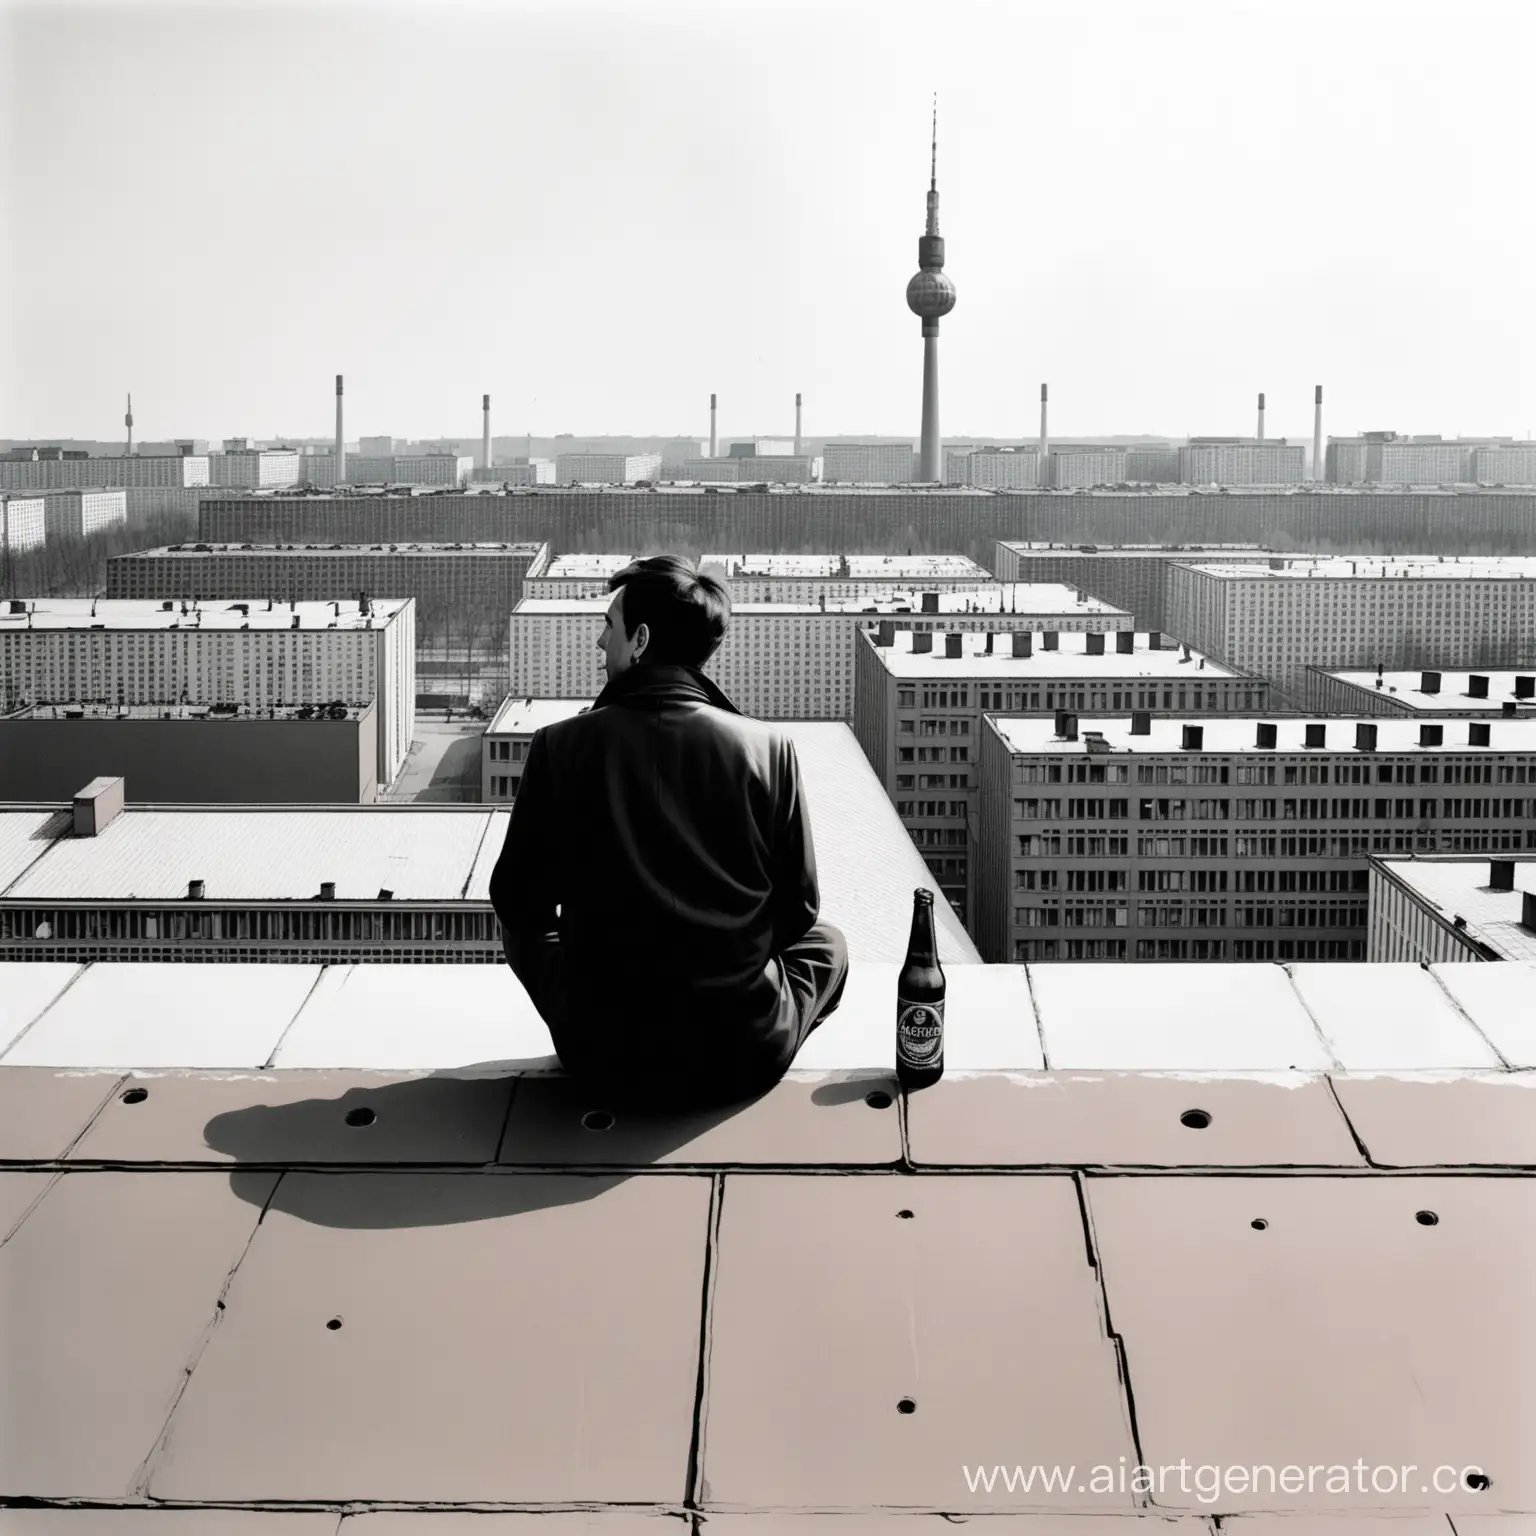 Man-Enjoying-Scenic-View-of-East-Germany-from-Rooftop-with-Beer